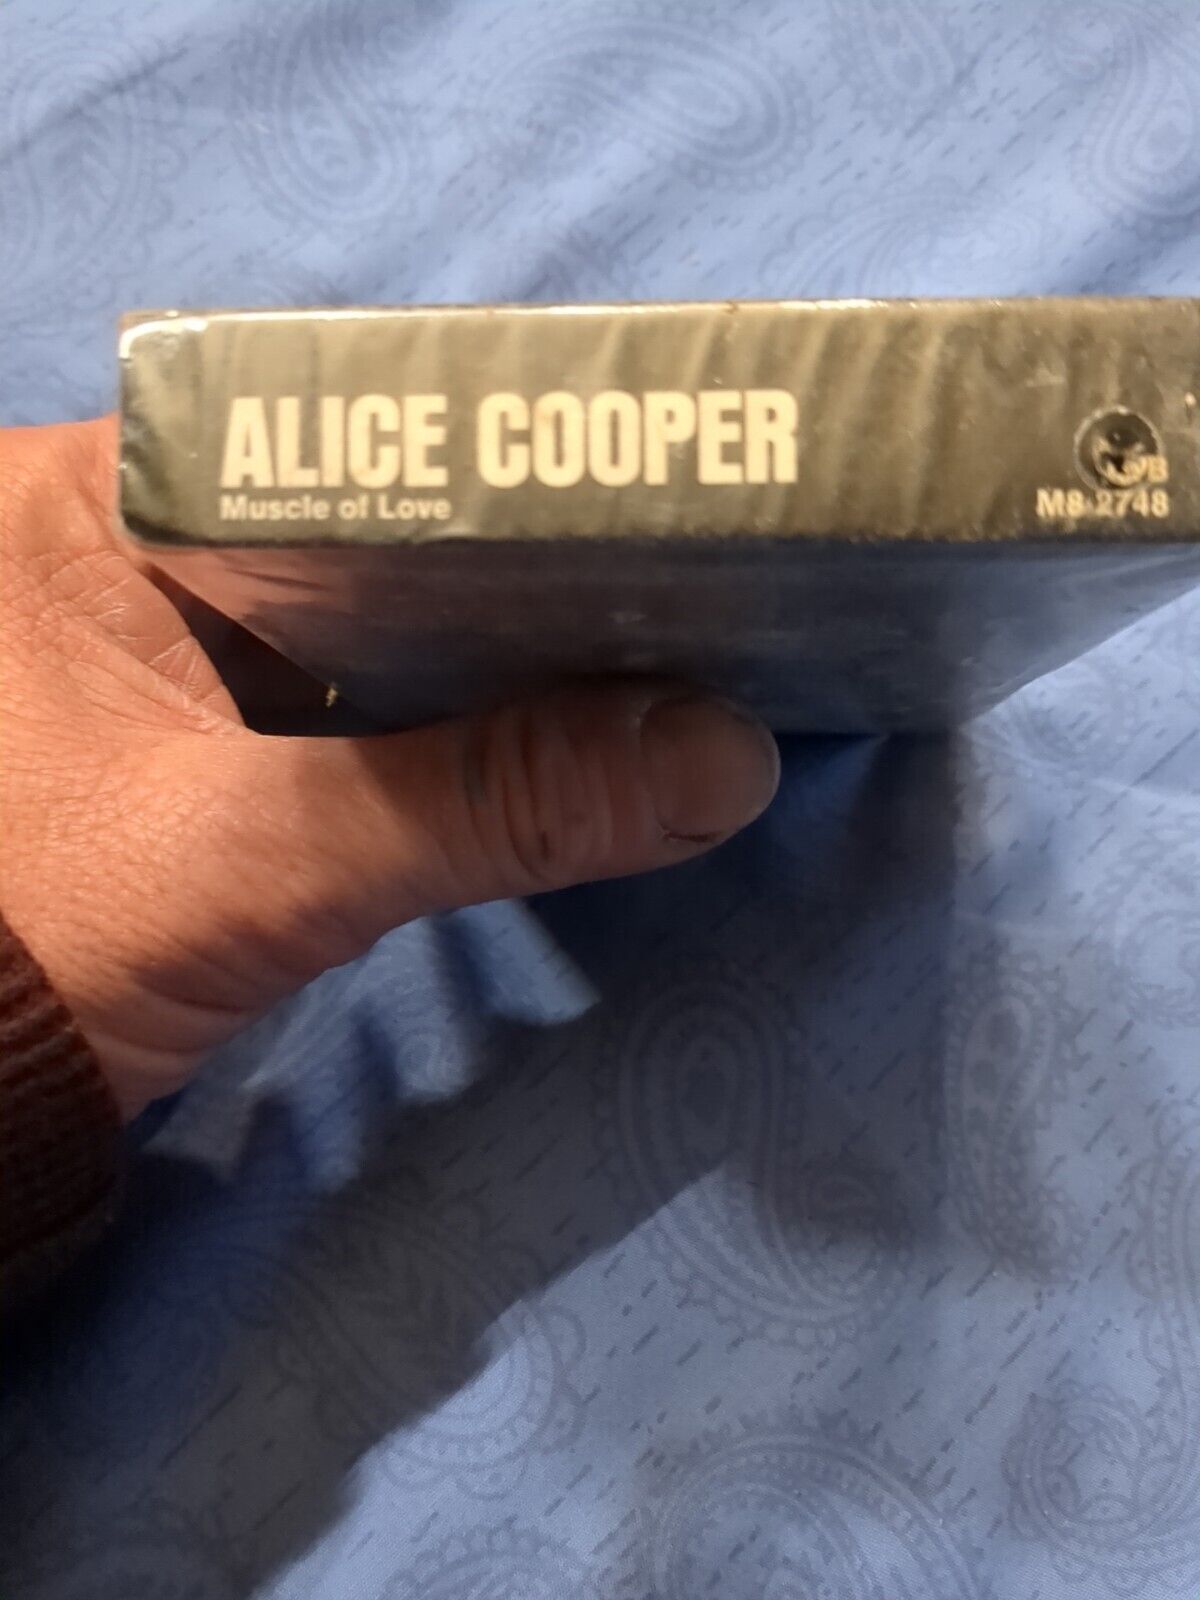 Alice Cooper 8 track tape \'muscle Of Love\'